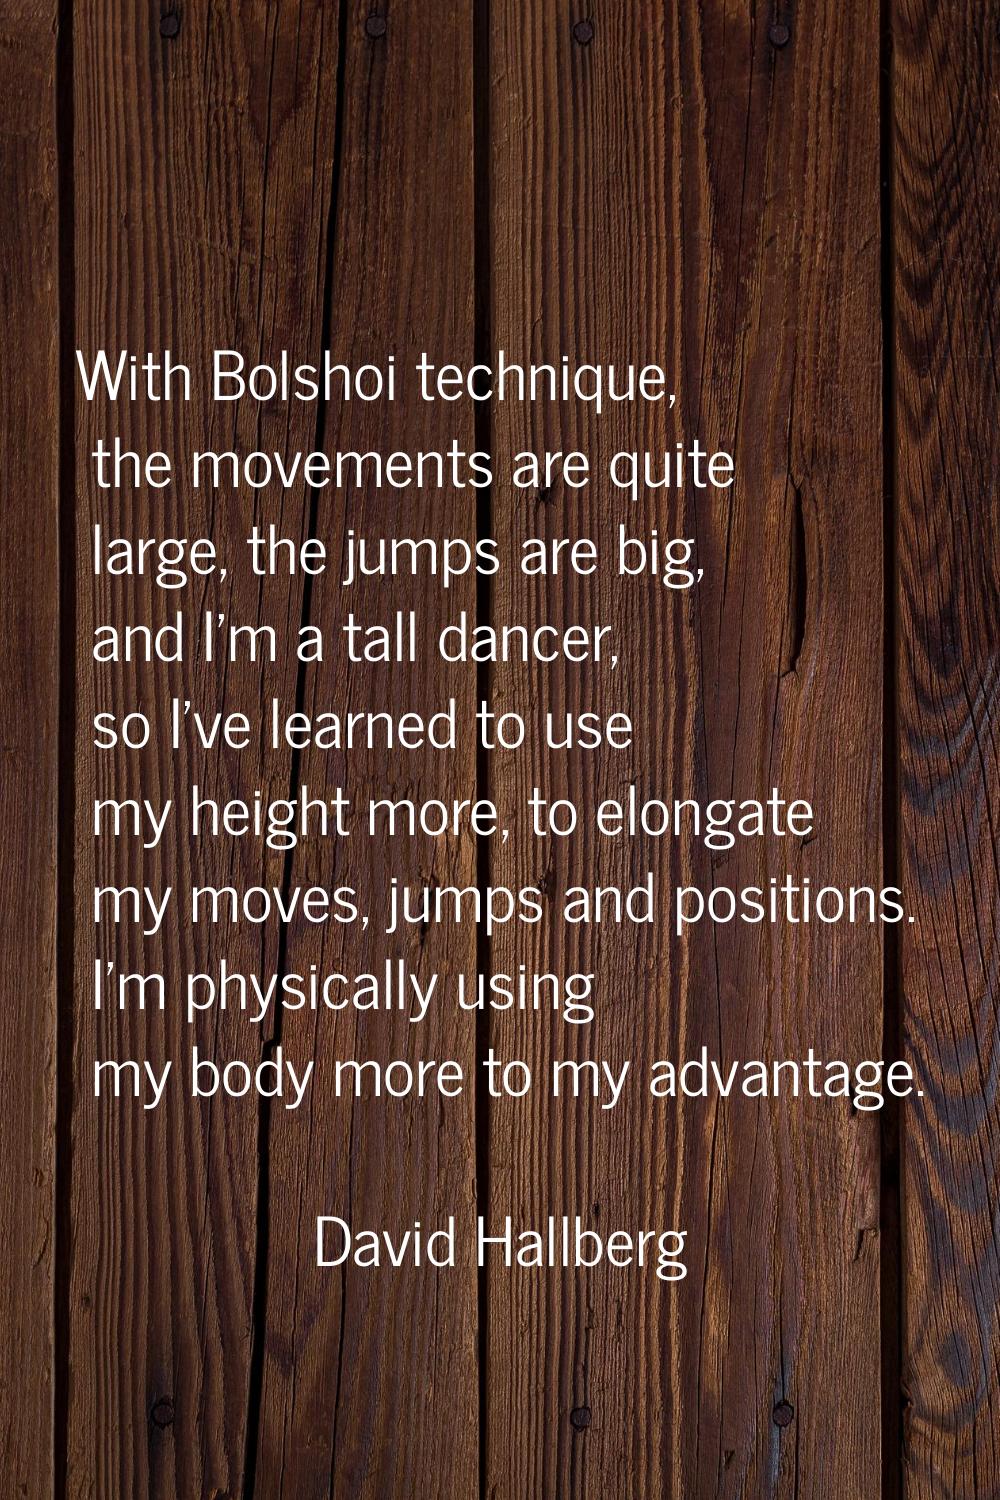 With Bolshoi technique, the movements are quite large, the jumps are big, and I'm a tall dancer, so